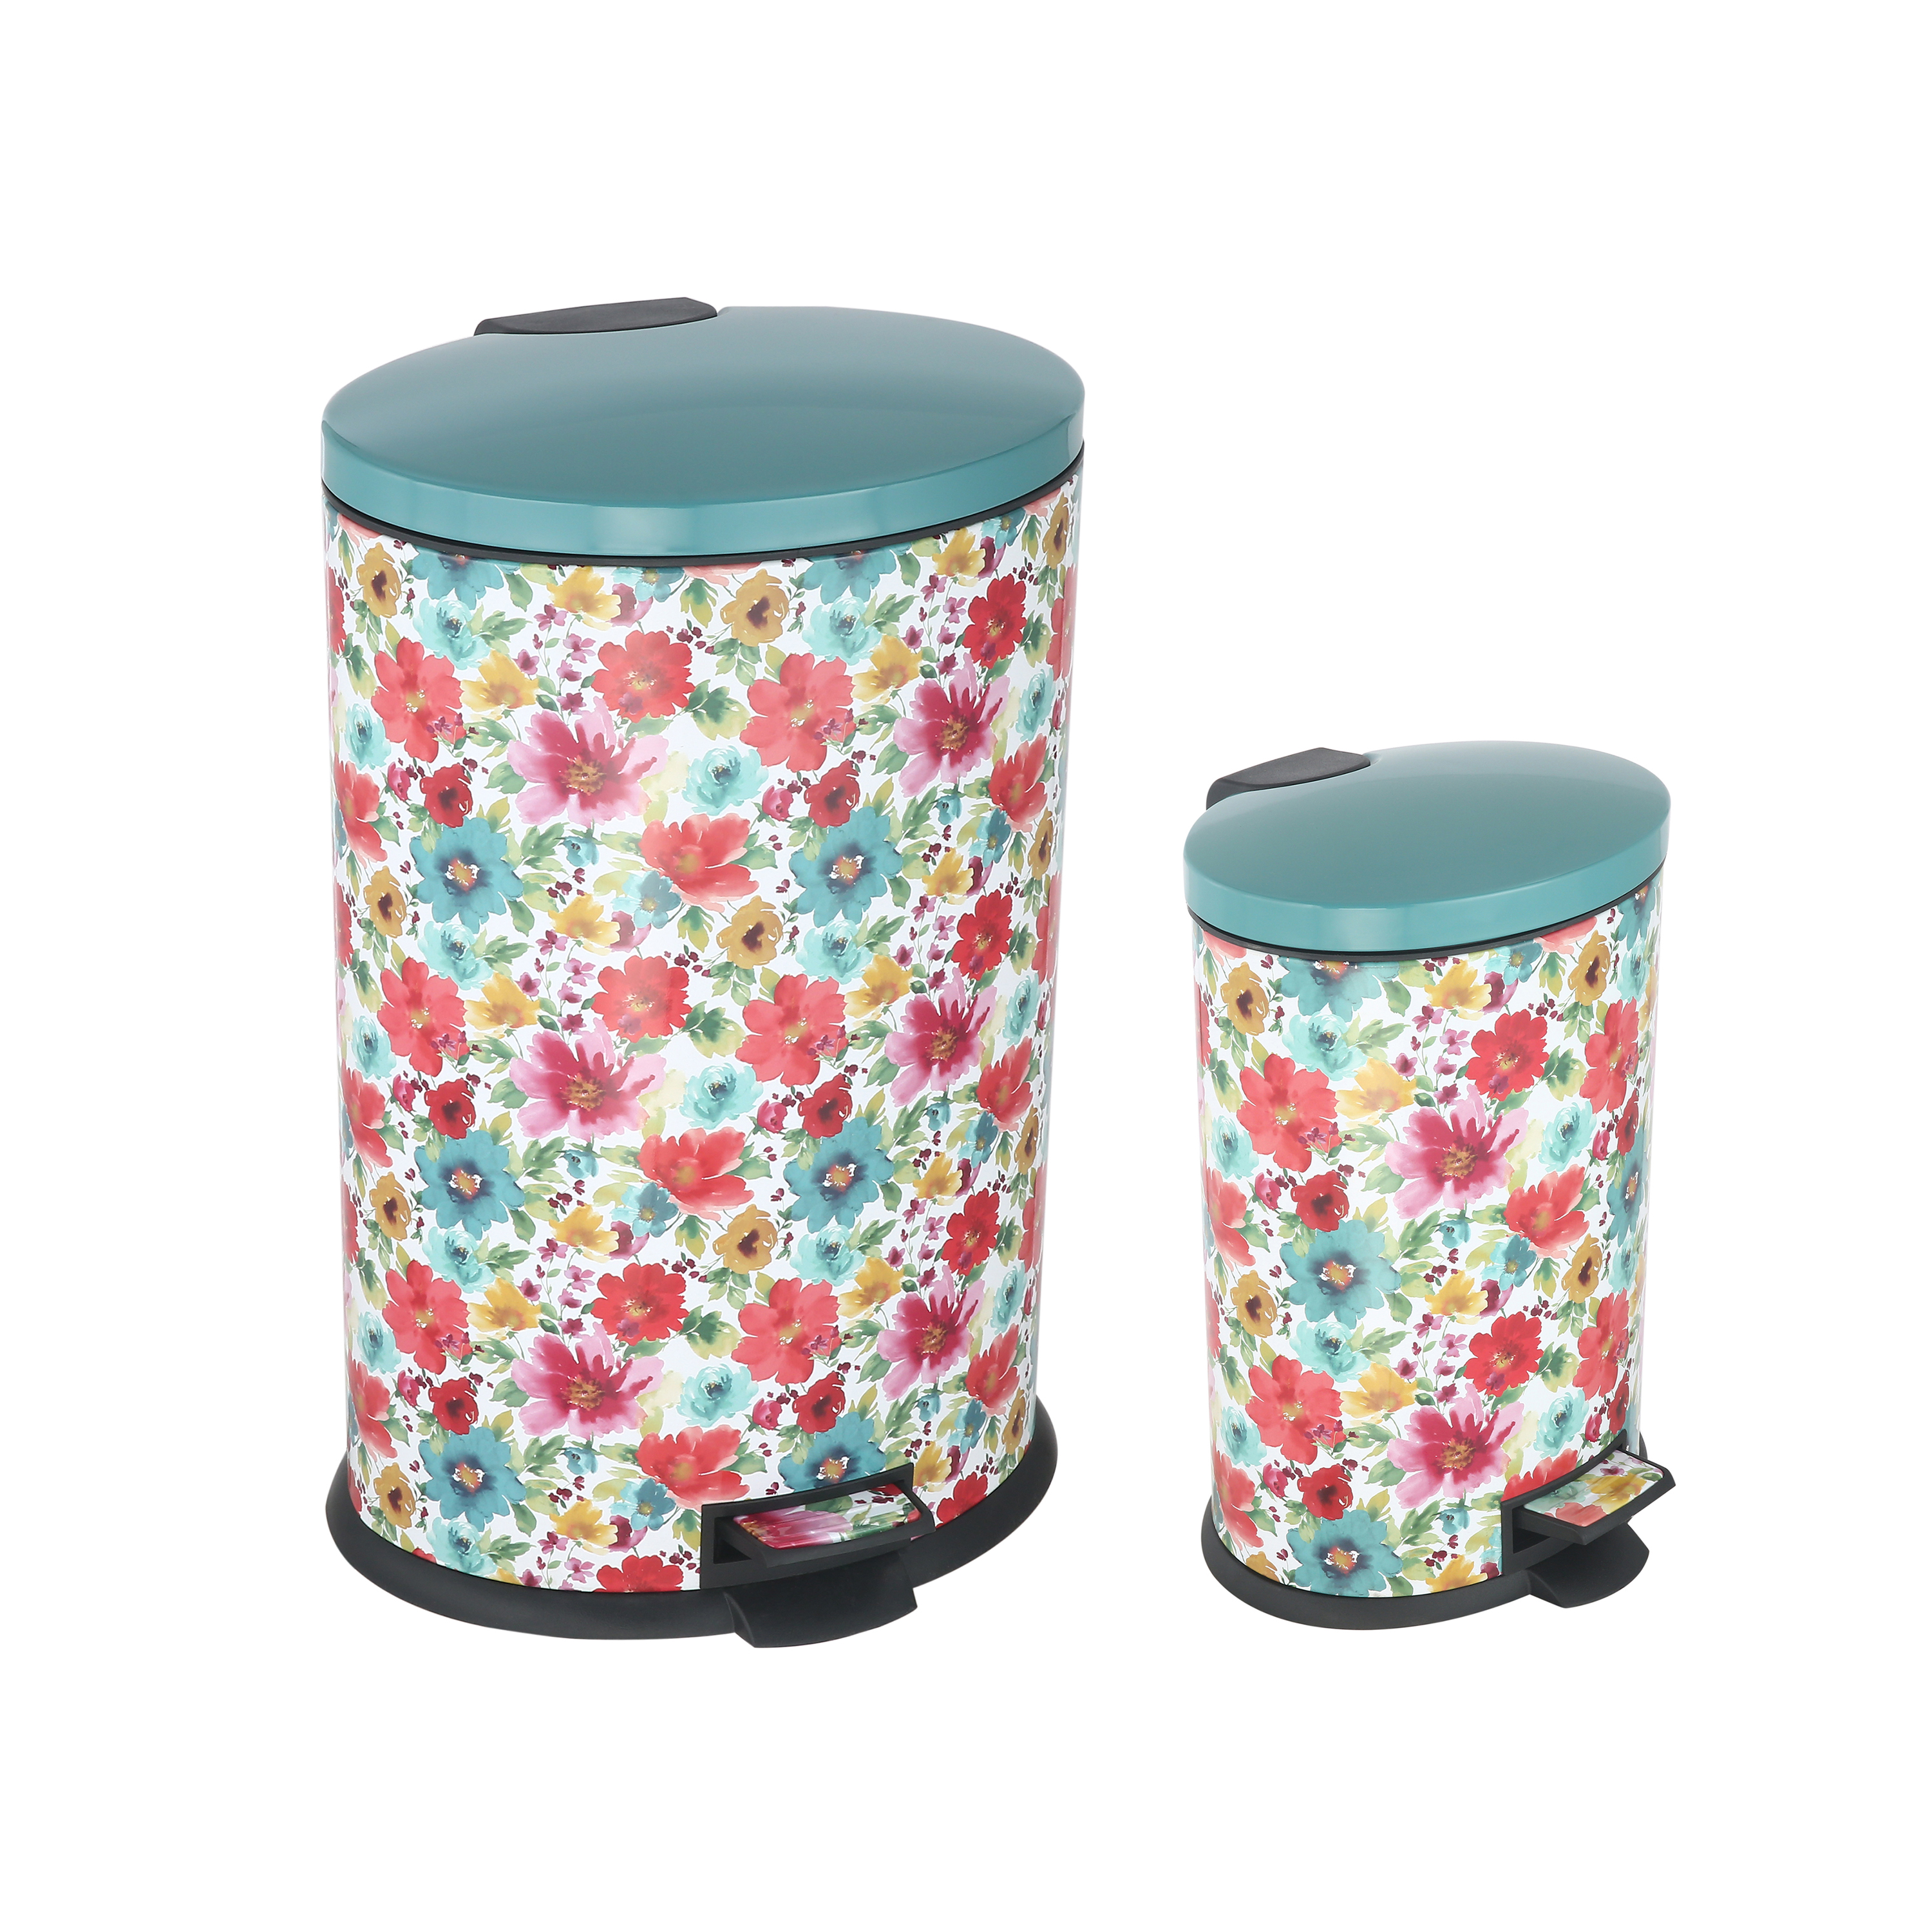 Pioneer Woman Stainless Steel 10.5 gal and 3.1 gal Kitchen Garbage Can Combo, Breezy Blossom - image 1 of 5